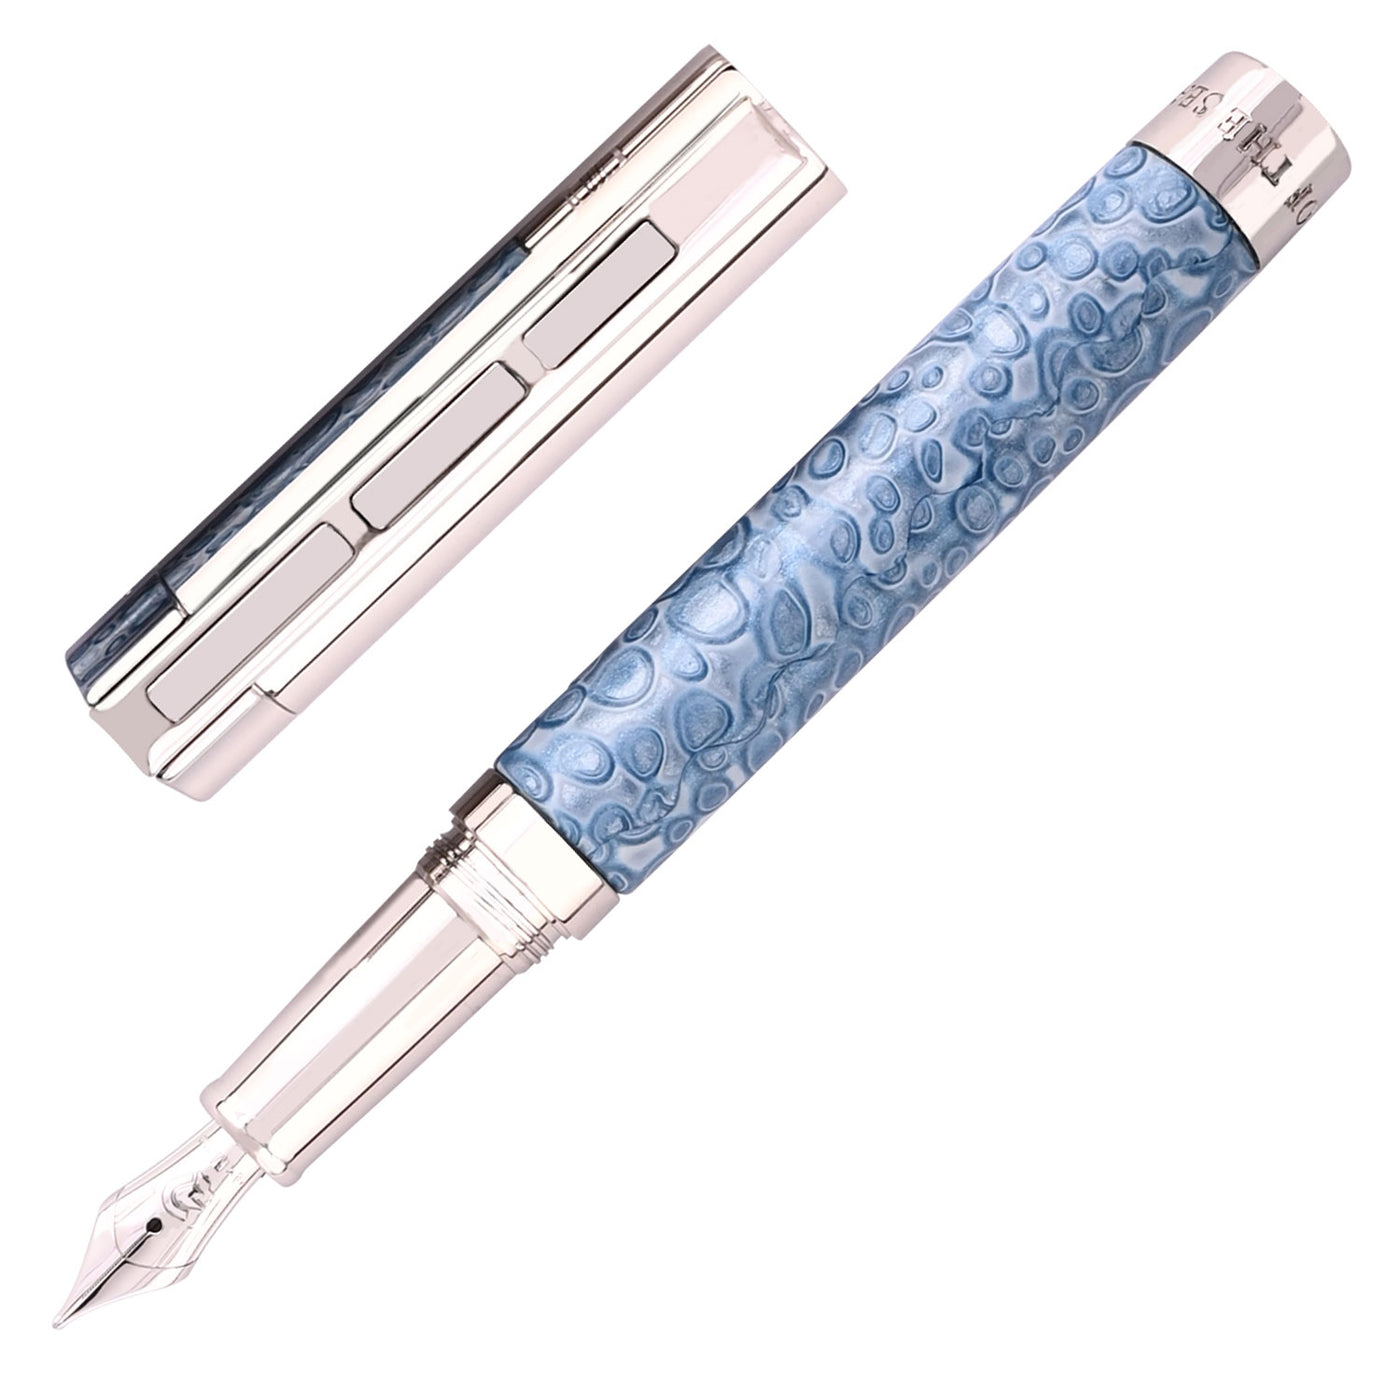 Staedtler Premium Pen of the Season Fountain Pen - Blue CT (Limited Edition) 1